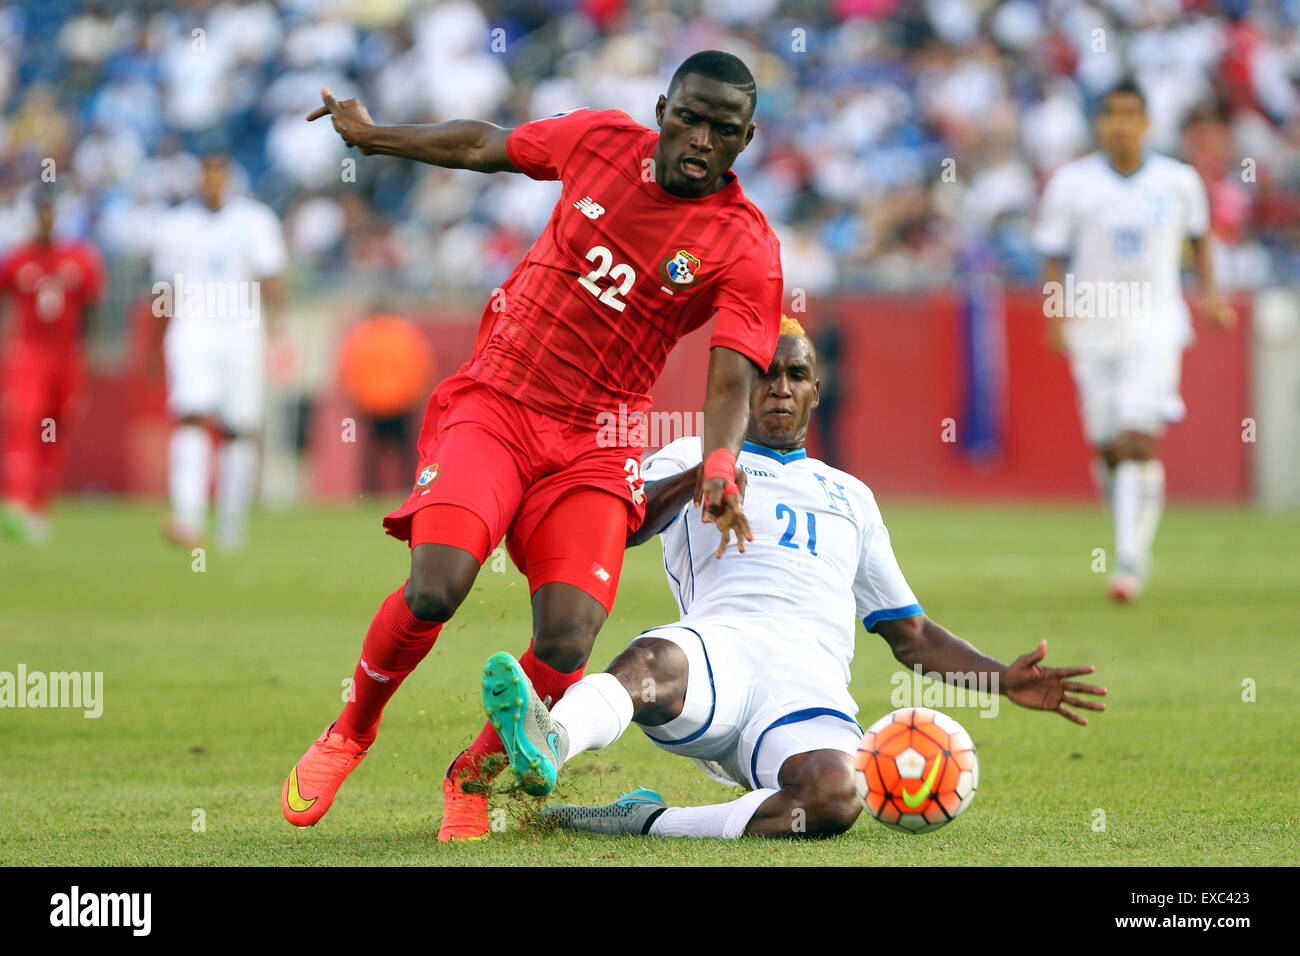 July 10, 2015; Foxborough, MA, USA; Panama forward Abdiel Arroyo (22) and Honduras defender Brayan Beckeles (21) in action during the second half of the CONCACAF Gold Cup match between Panama and Honduras at Gillette Stadium. The match ended in a 1-1 tie. Anthony Nesmith/Cal Sport Media Stock Photo